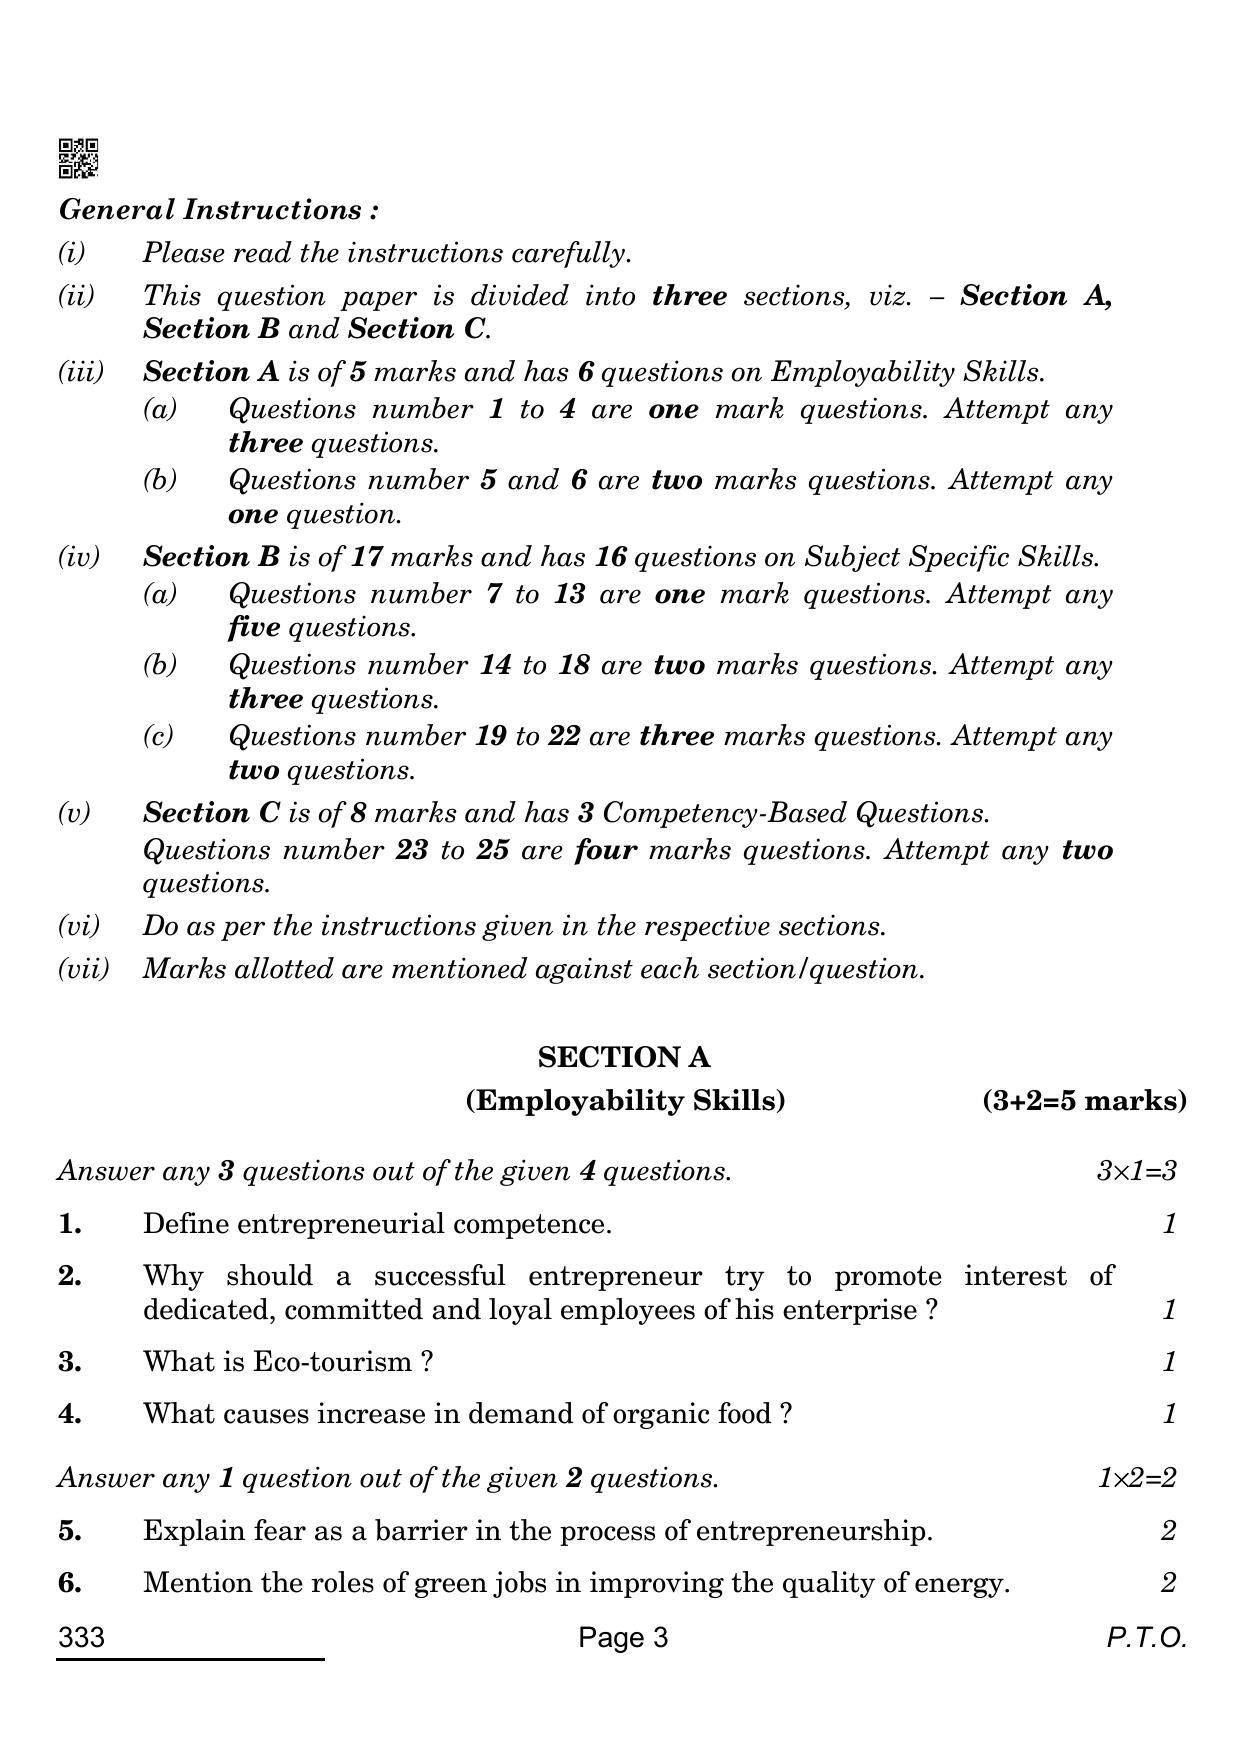 CBSE Class 12 333_food Production 2022 Question Paper - Page 3